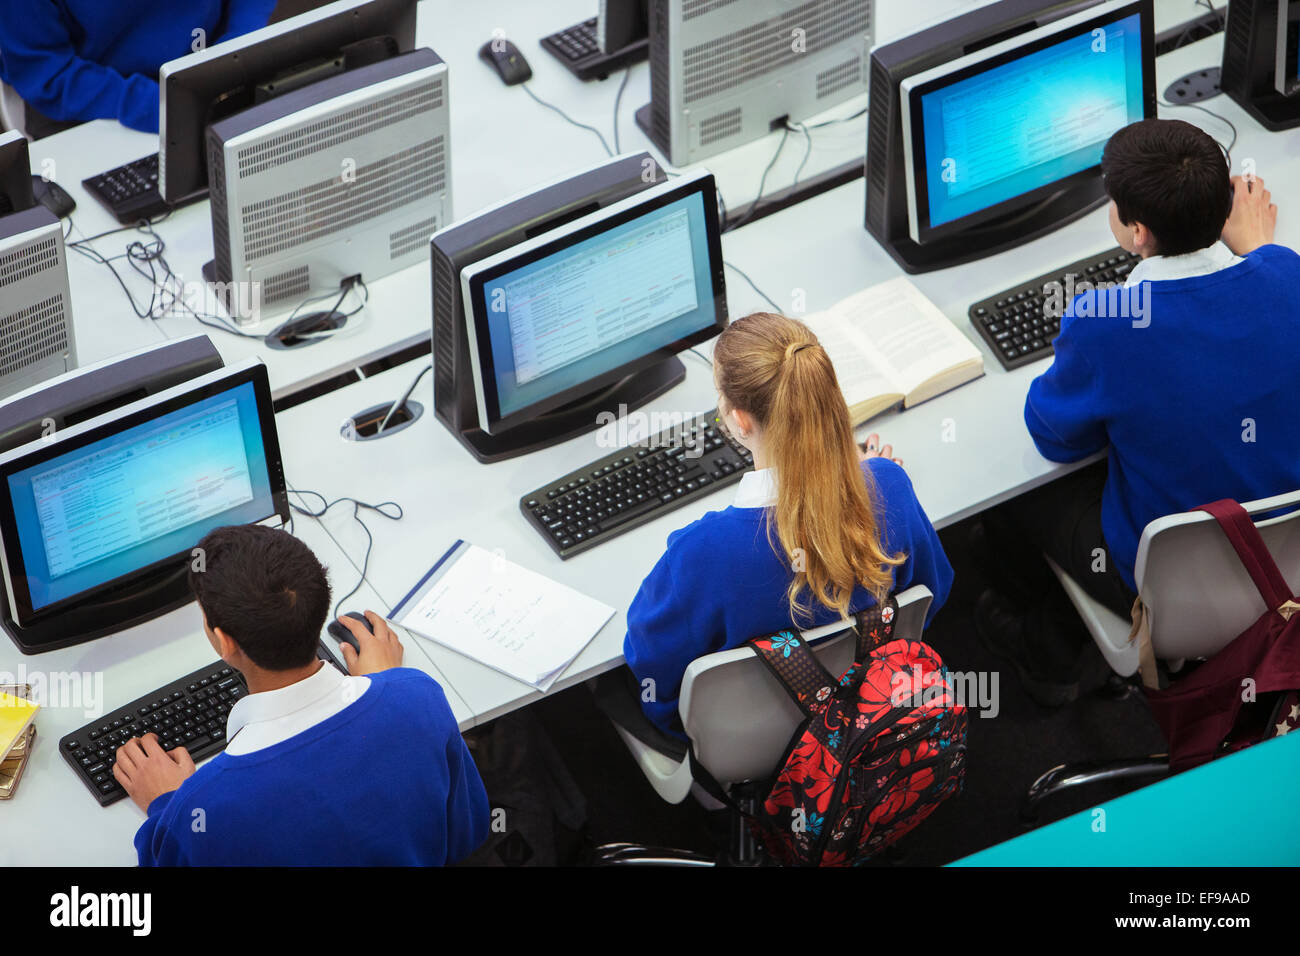 Elevated view of students sitting and learning in computer room Stock Photo